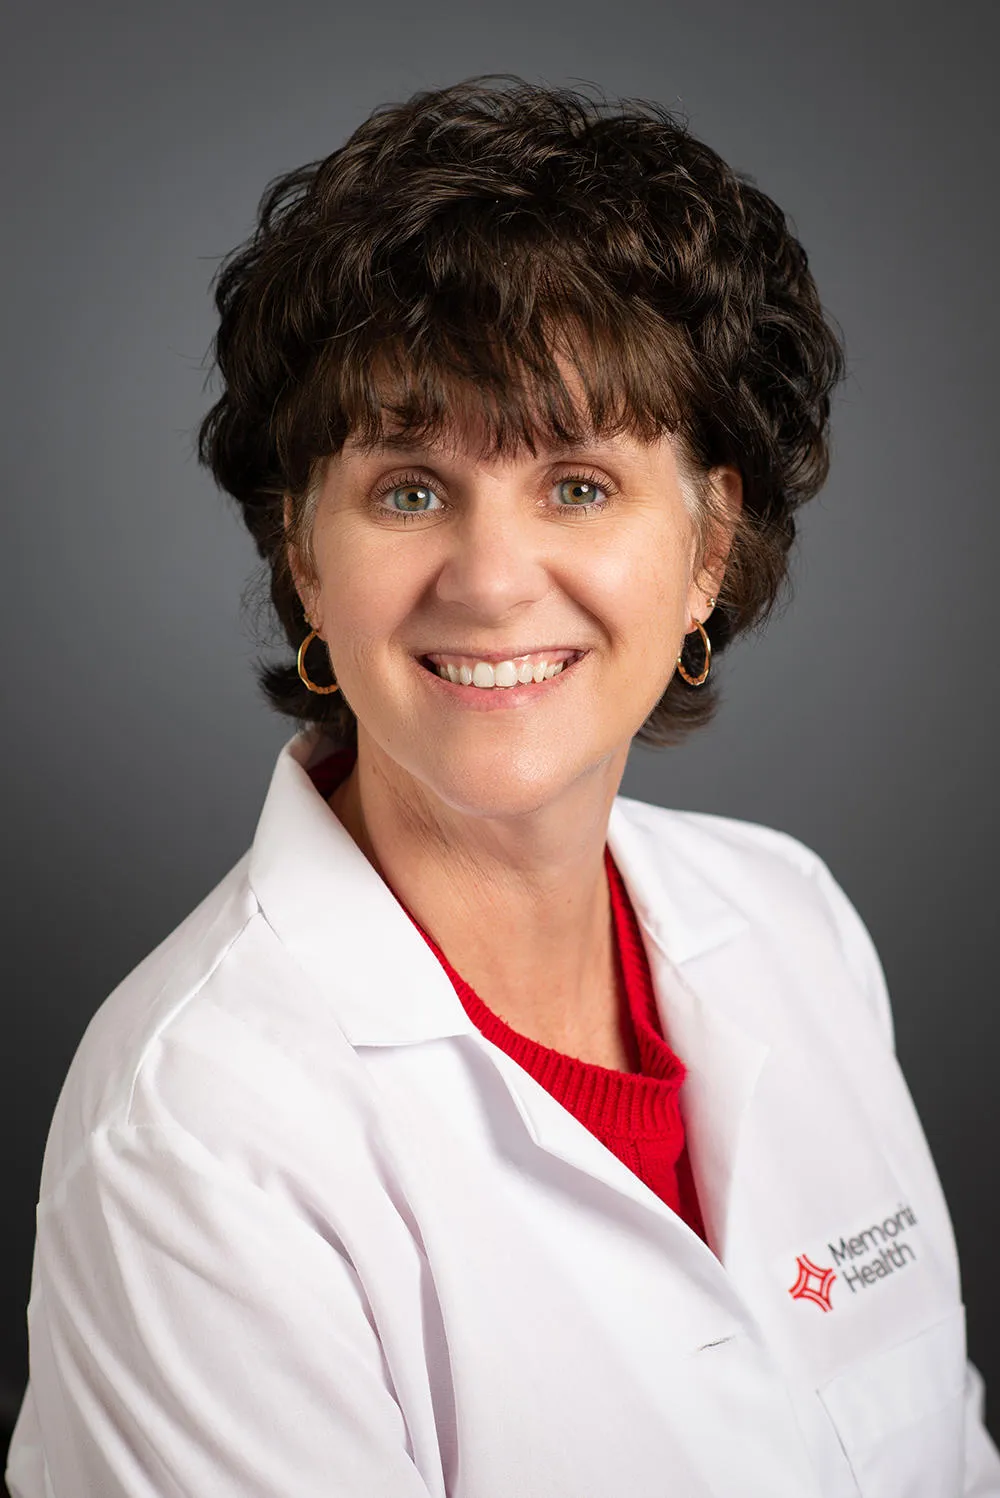 Dr. Candace Benner